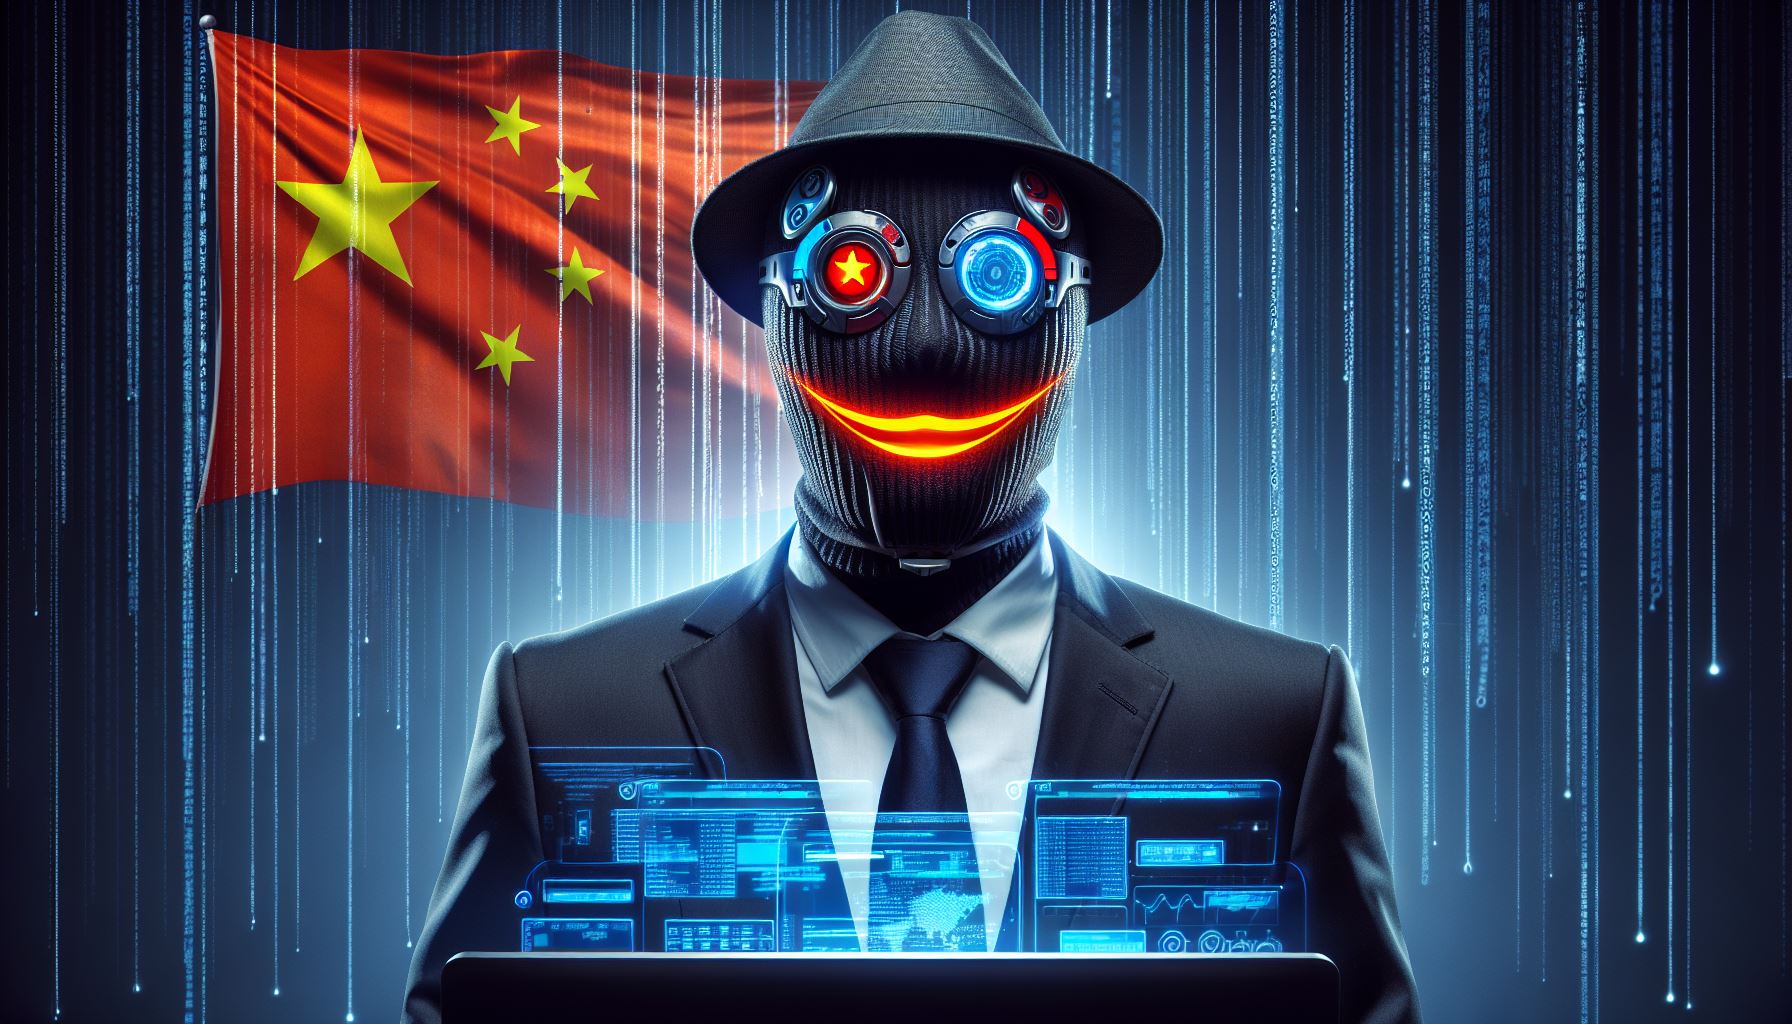 i-S00N - Leaked Documents Reveal Chinese Spyware Vendor's Capabilities